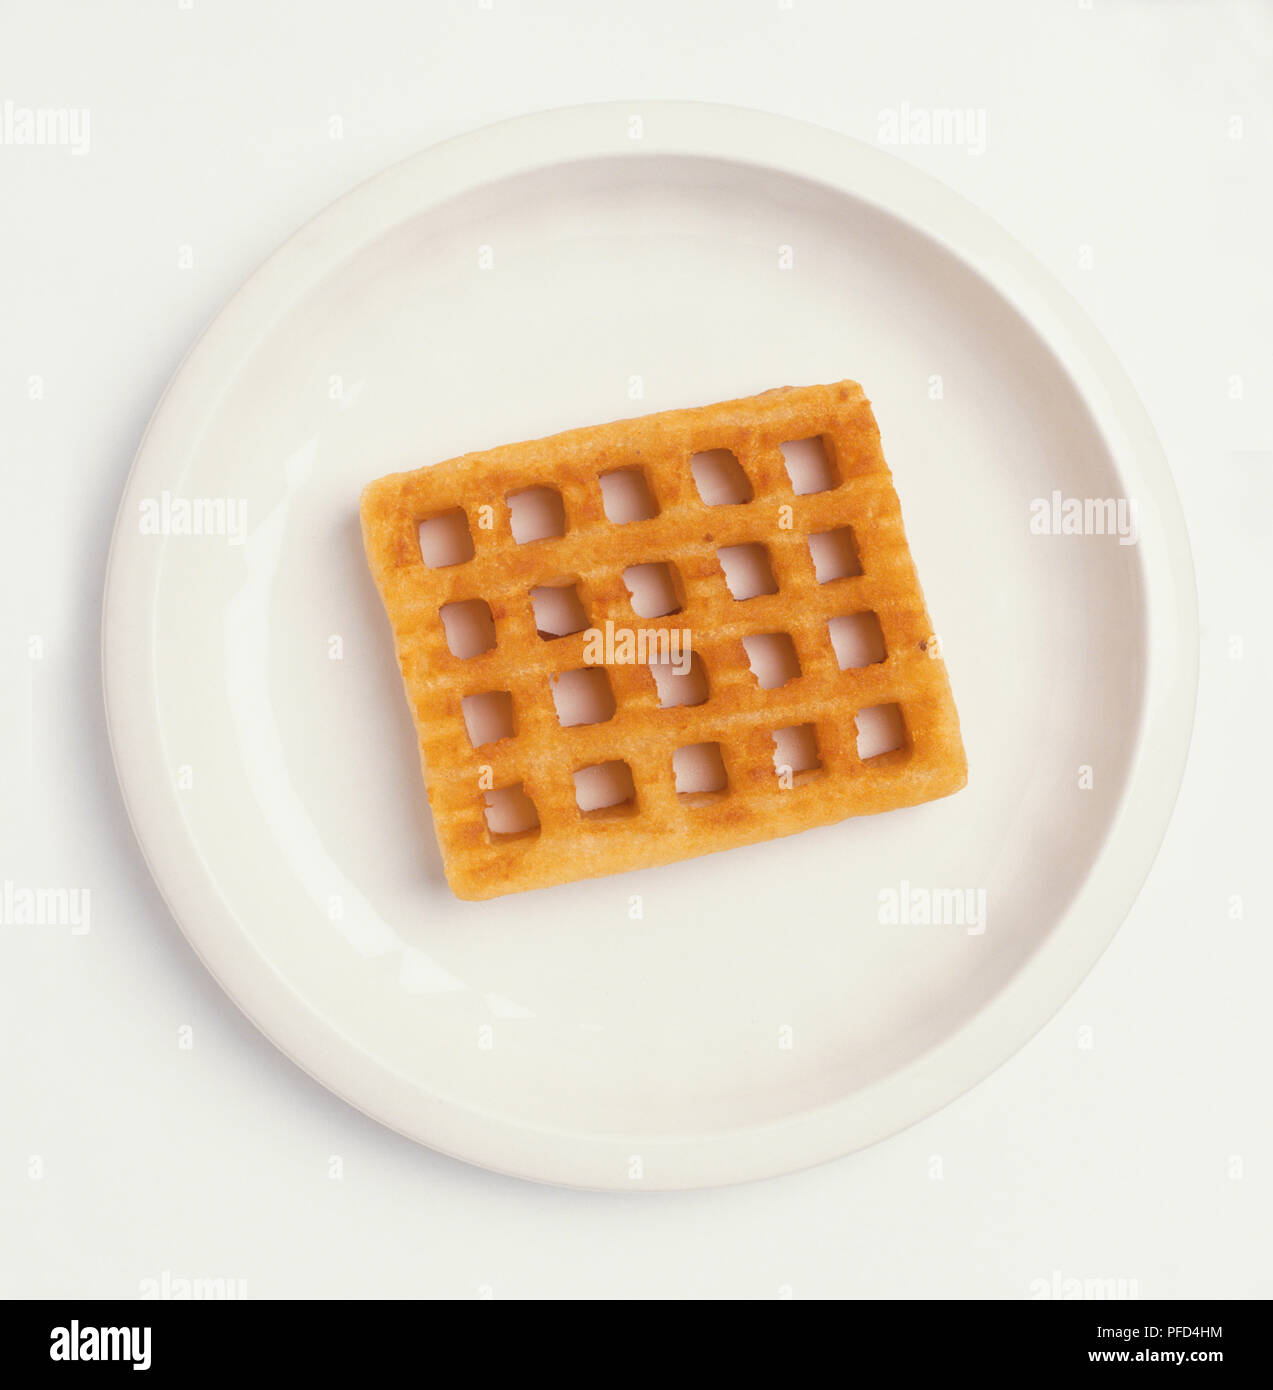 Waffle showing a pattern of square holes, served on a plate, view from above Stock Photo